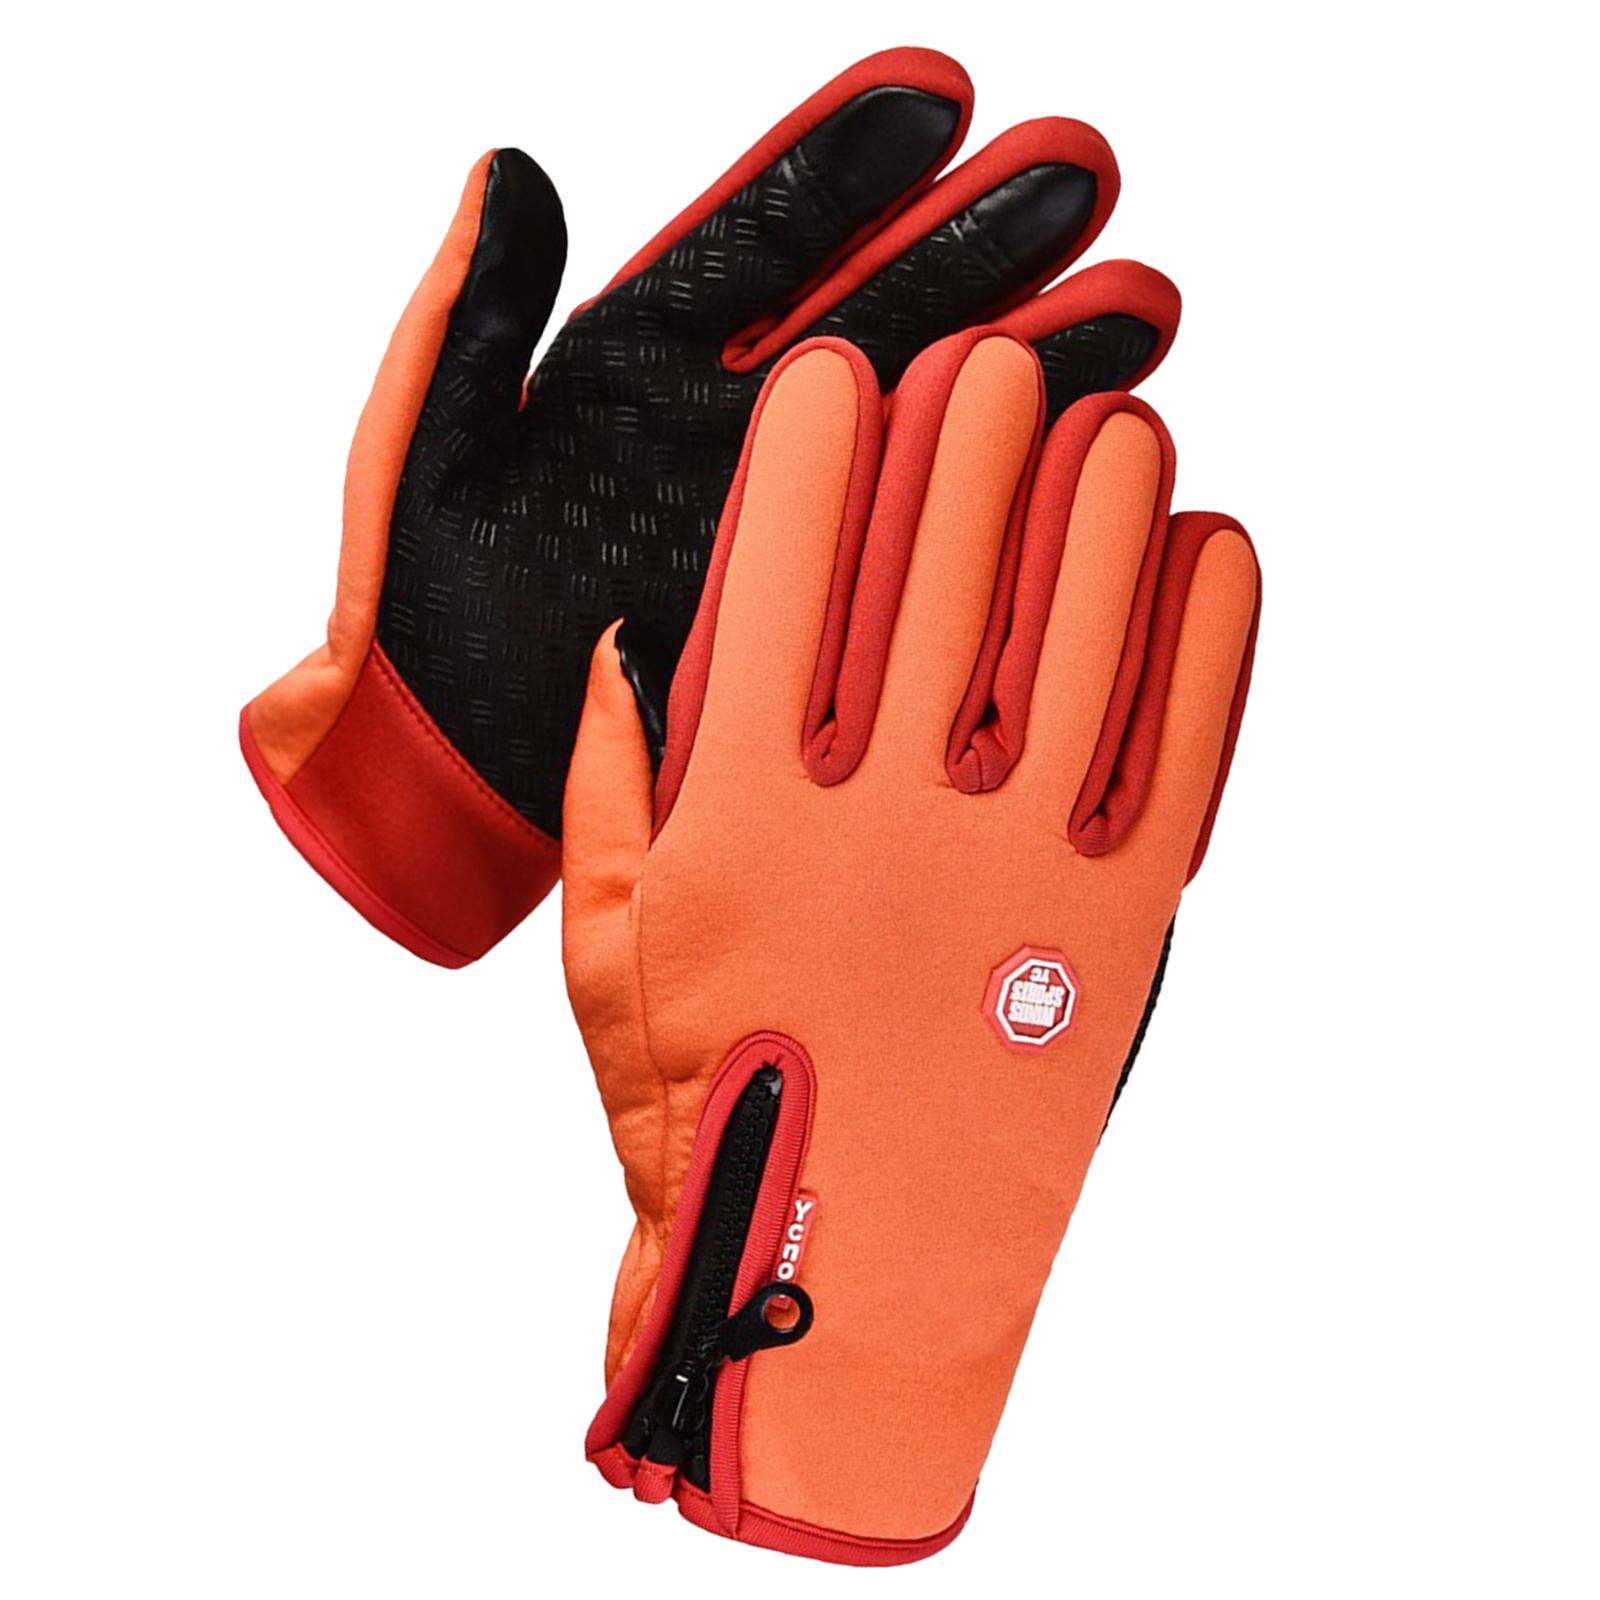 Winter Gloves Nonslip Thermal Gloves for Outdoor Running Sports Motorcycle Orange S